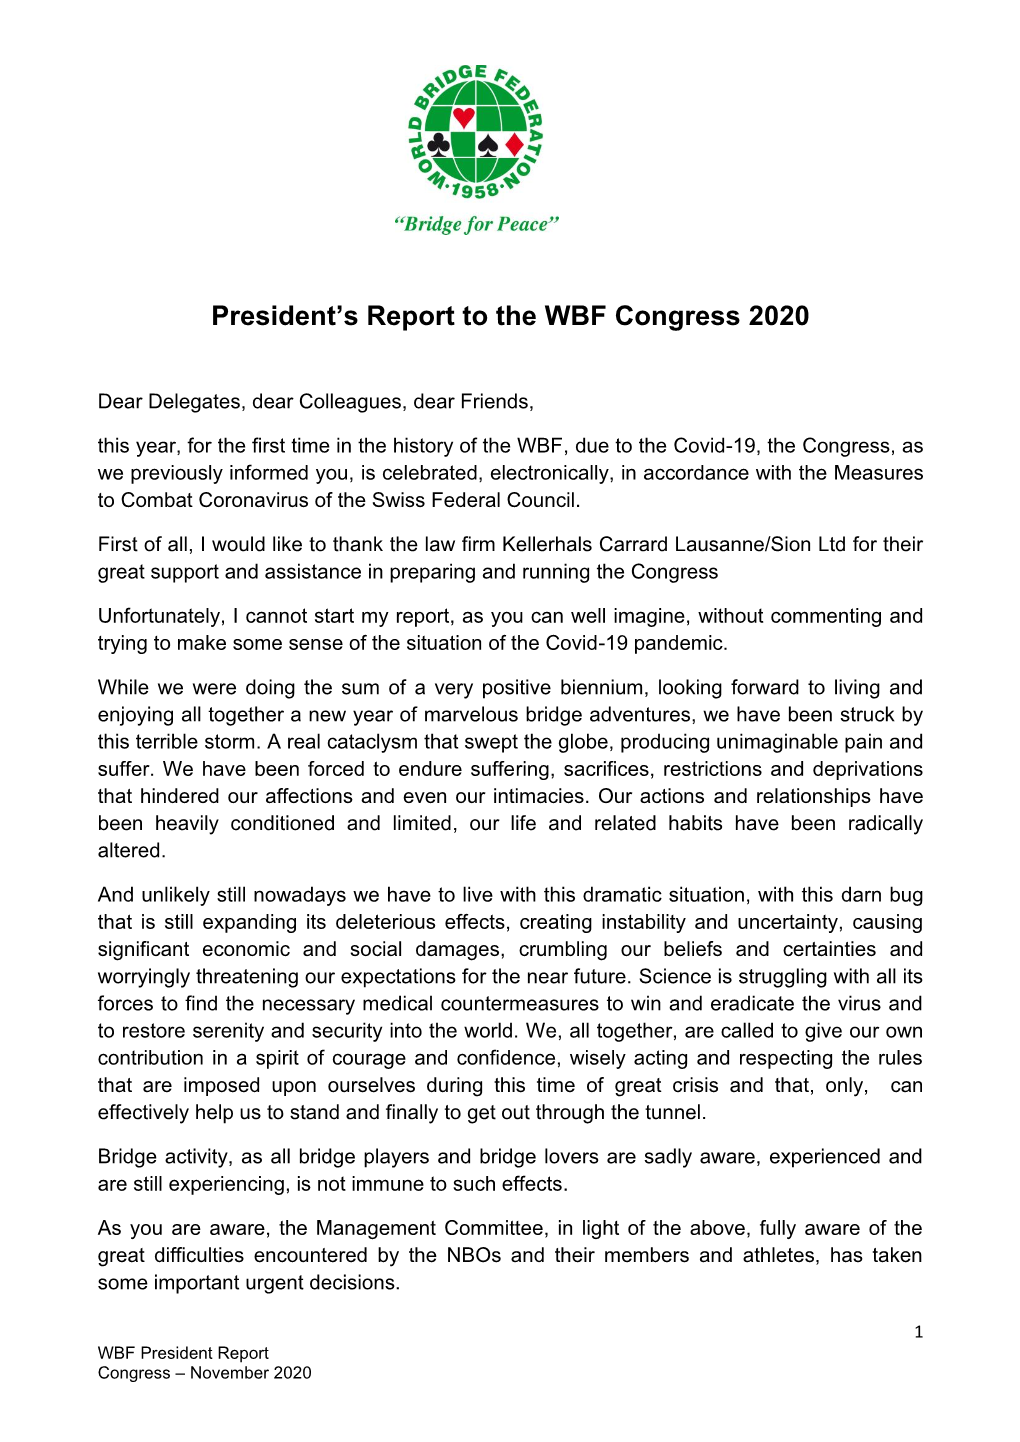 President's Report to the WBF Congress 2020